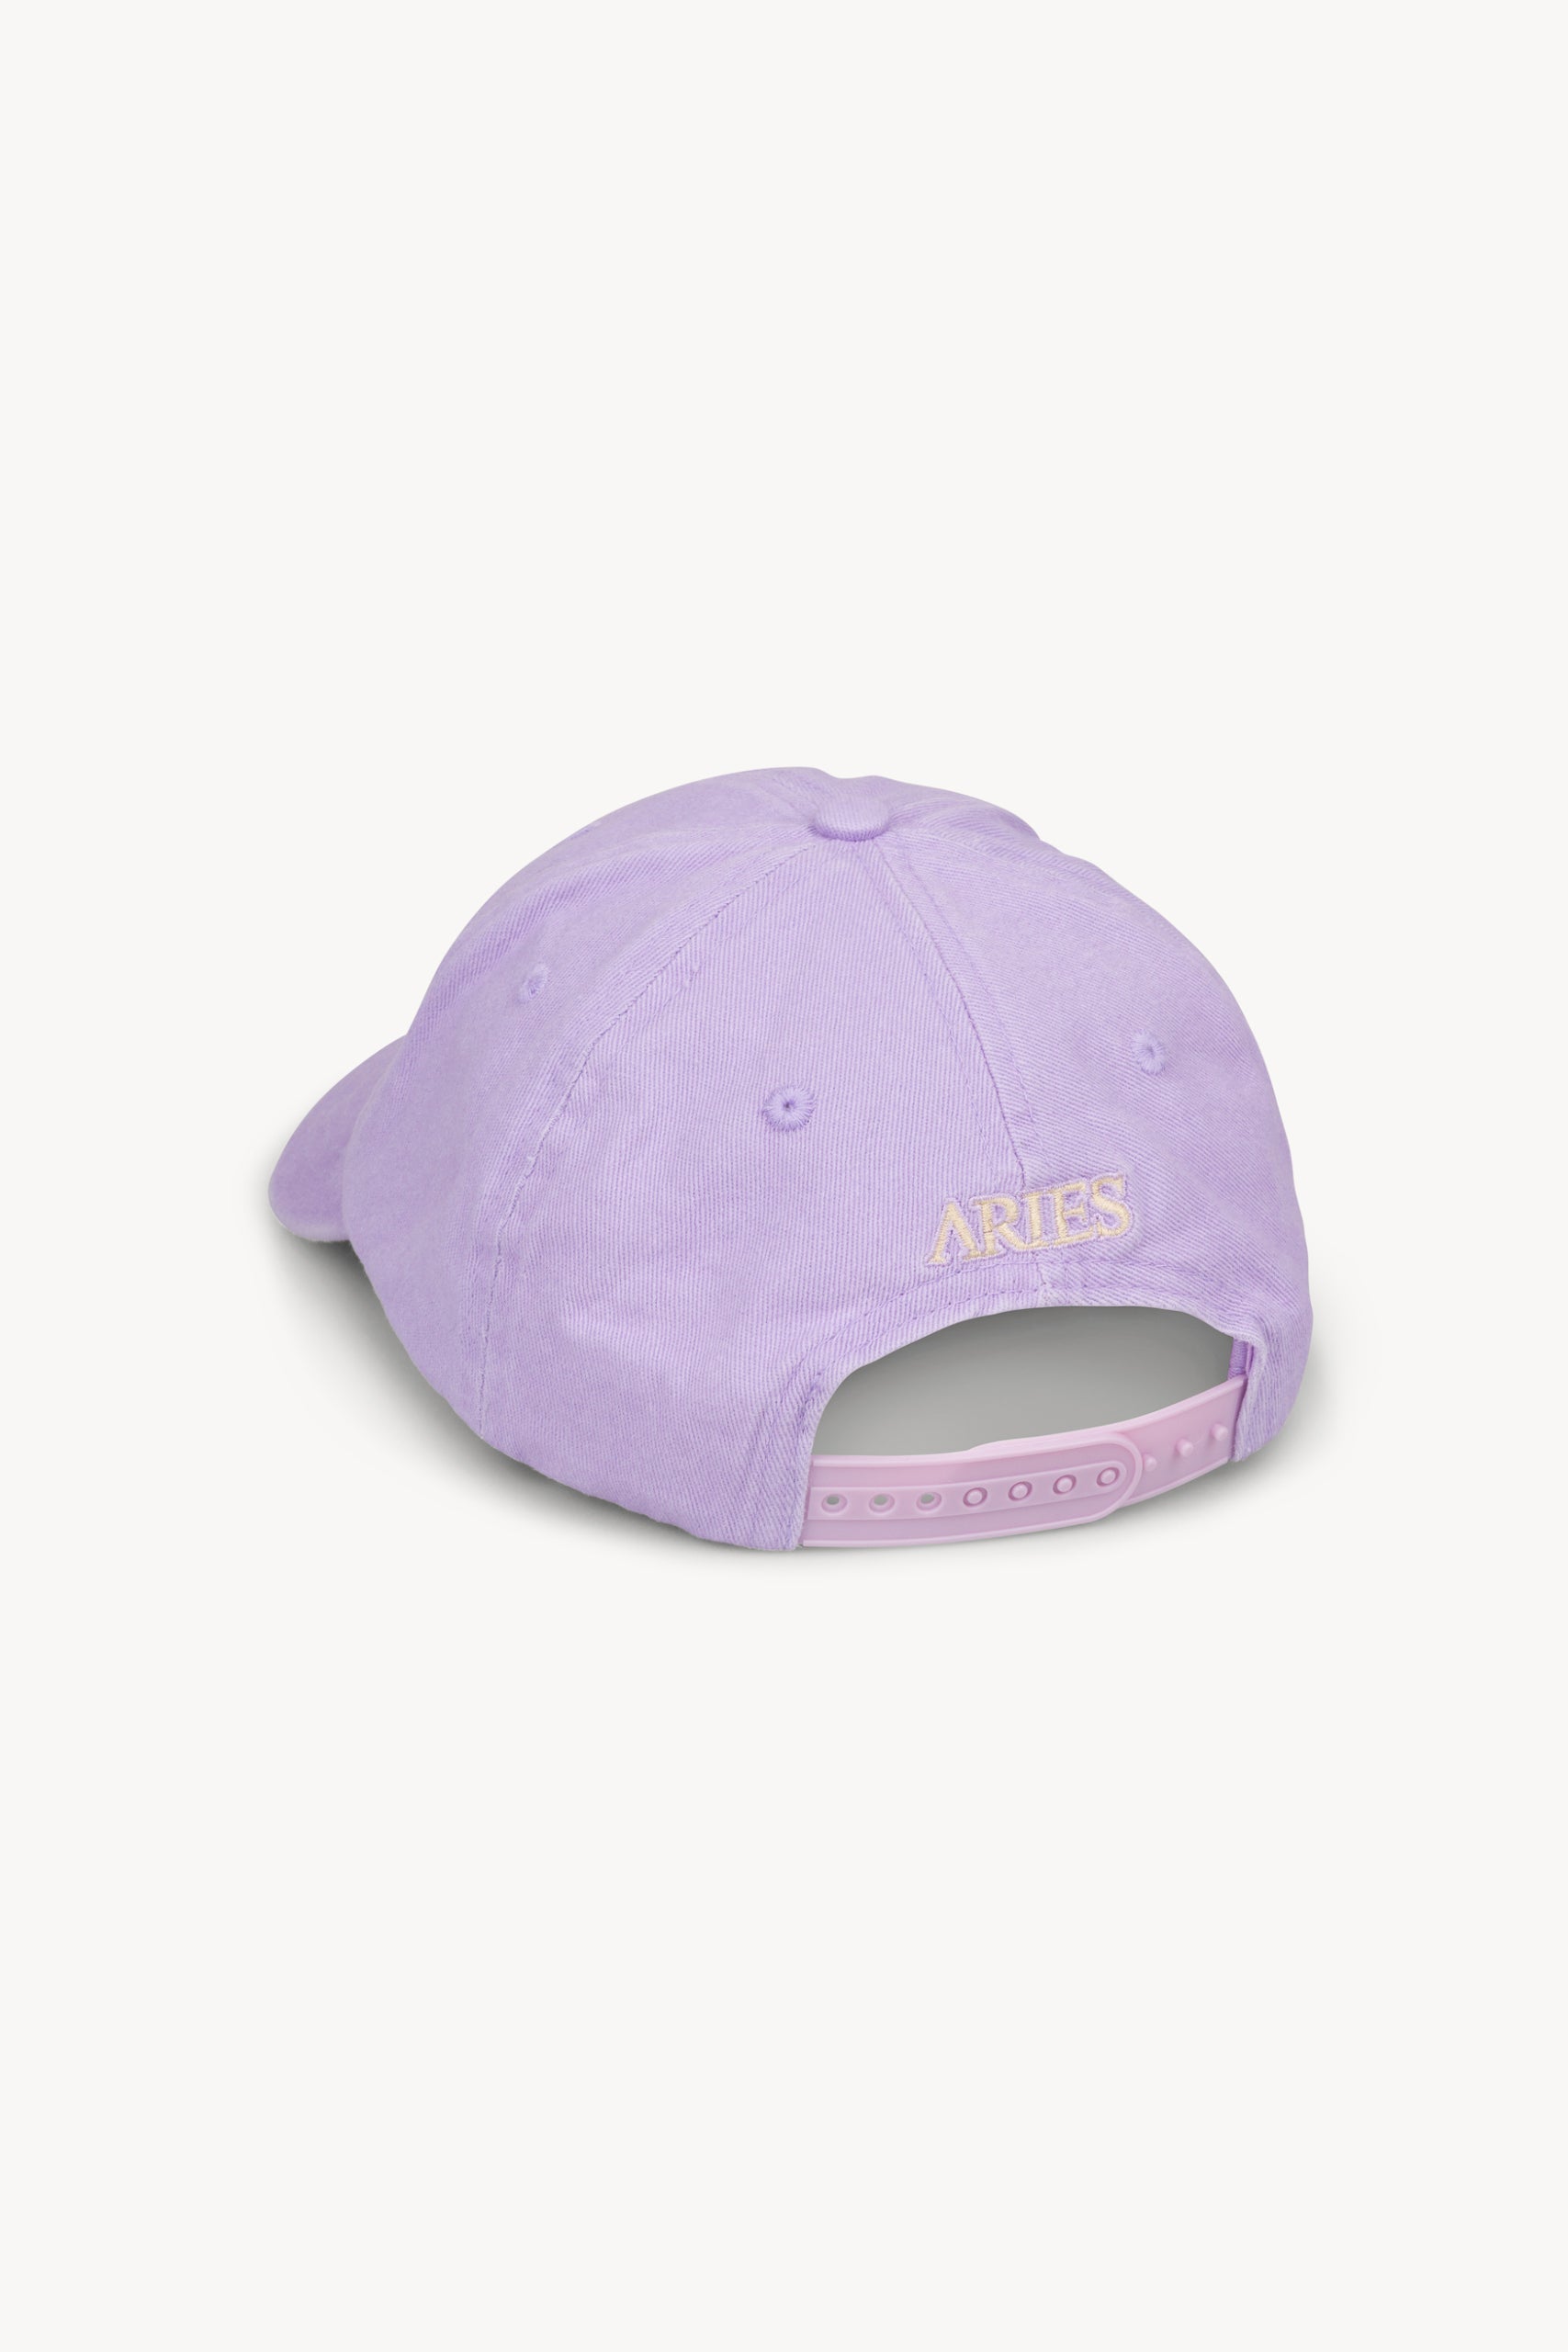 ARIES ARISE DON'T BE A SQUARE CAP LILAC